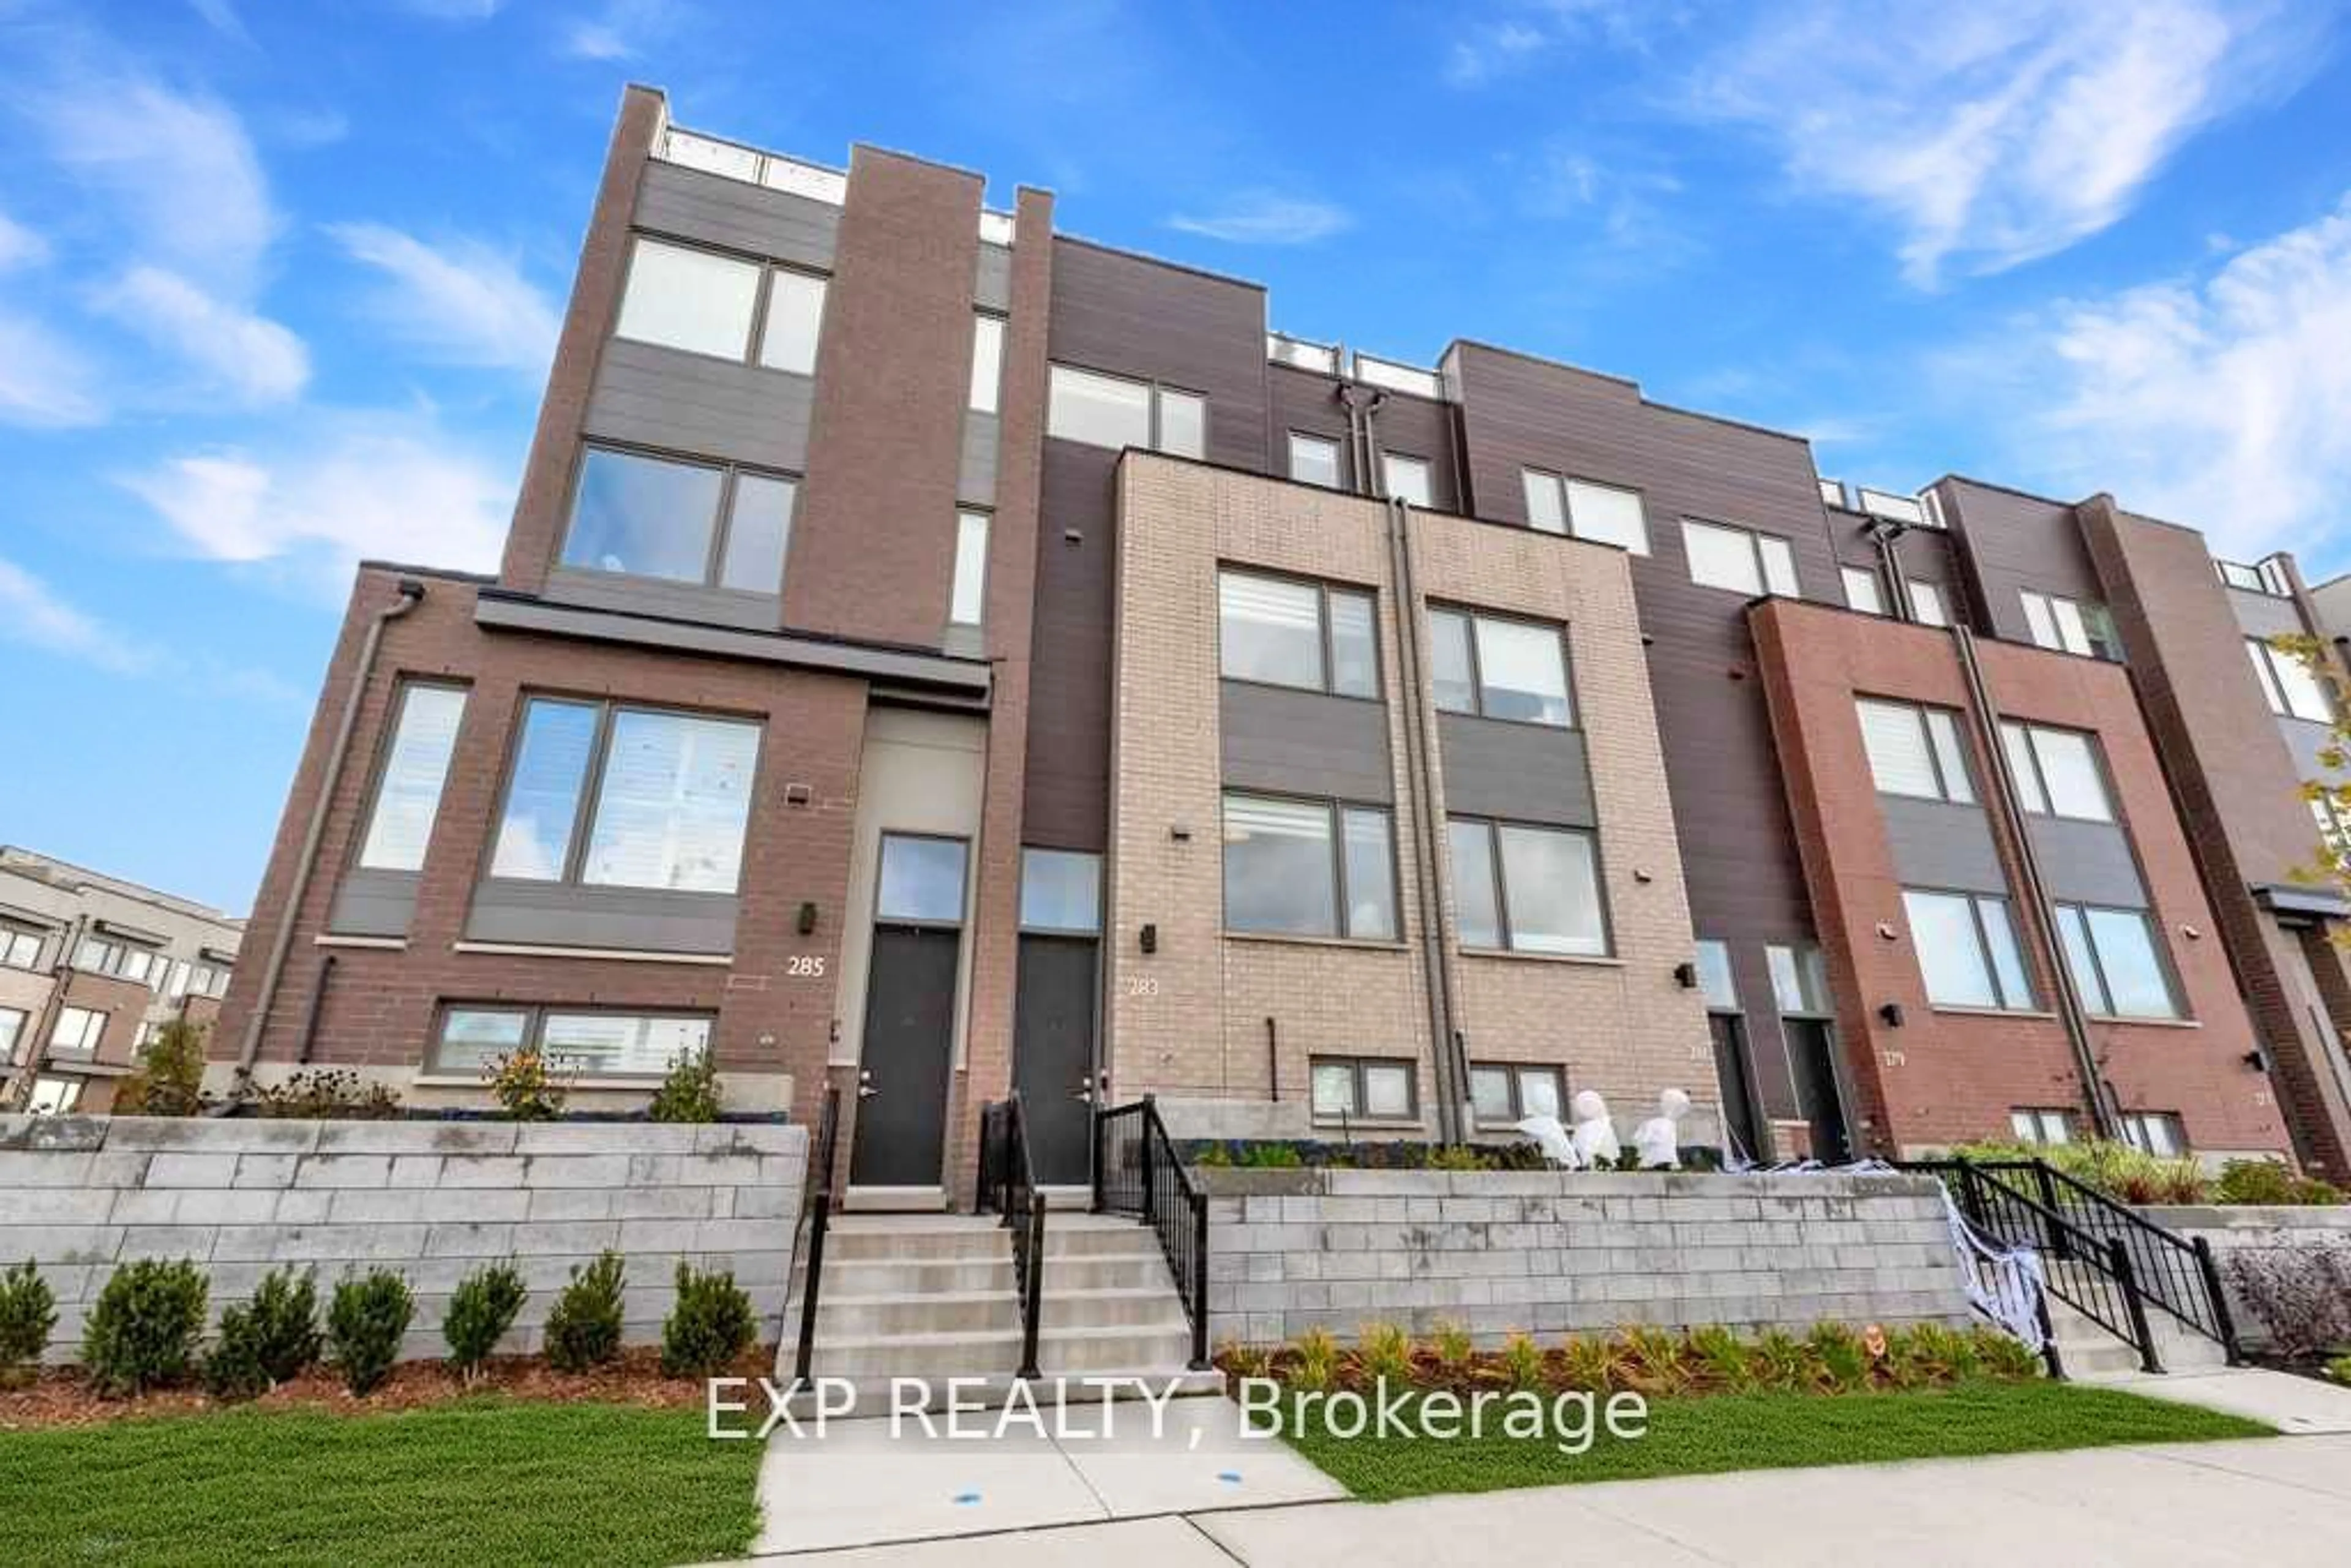 A pic from exterior of the house or condo for 283 Downsview Park, Toronto Ontario M3K 0B6